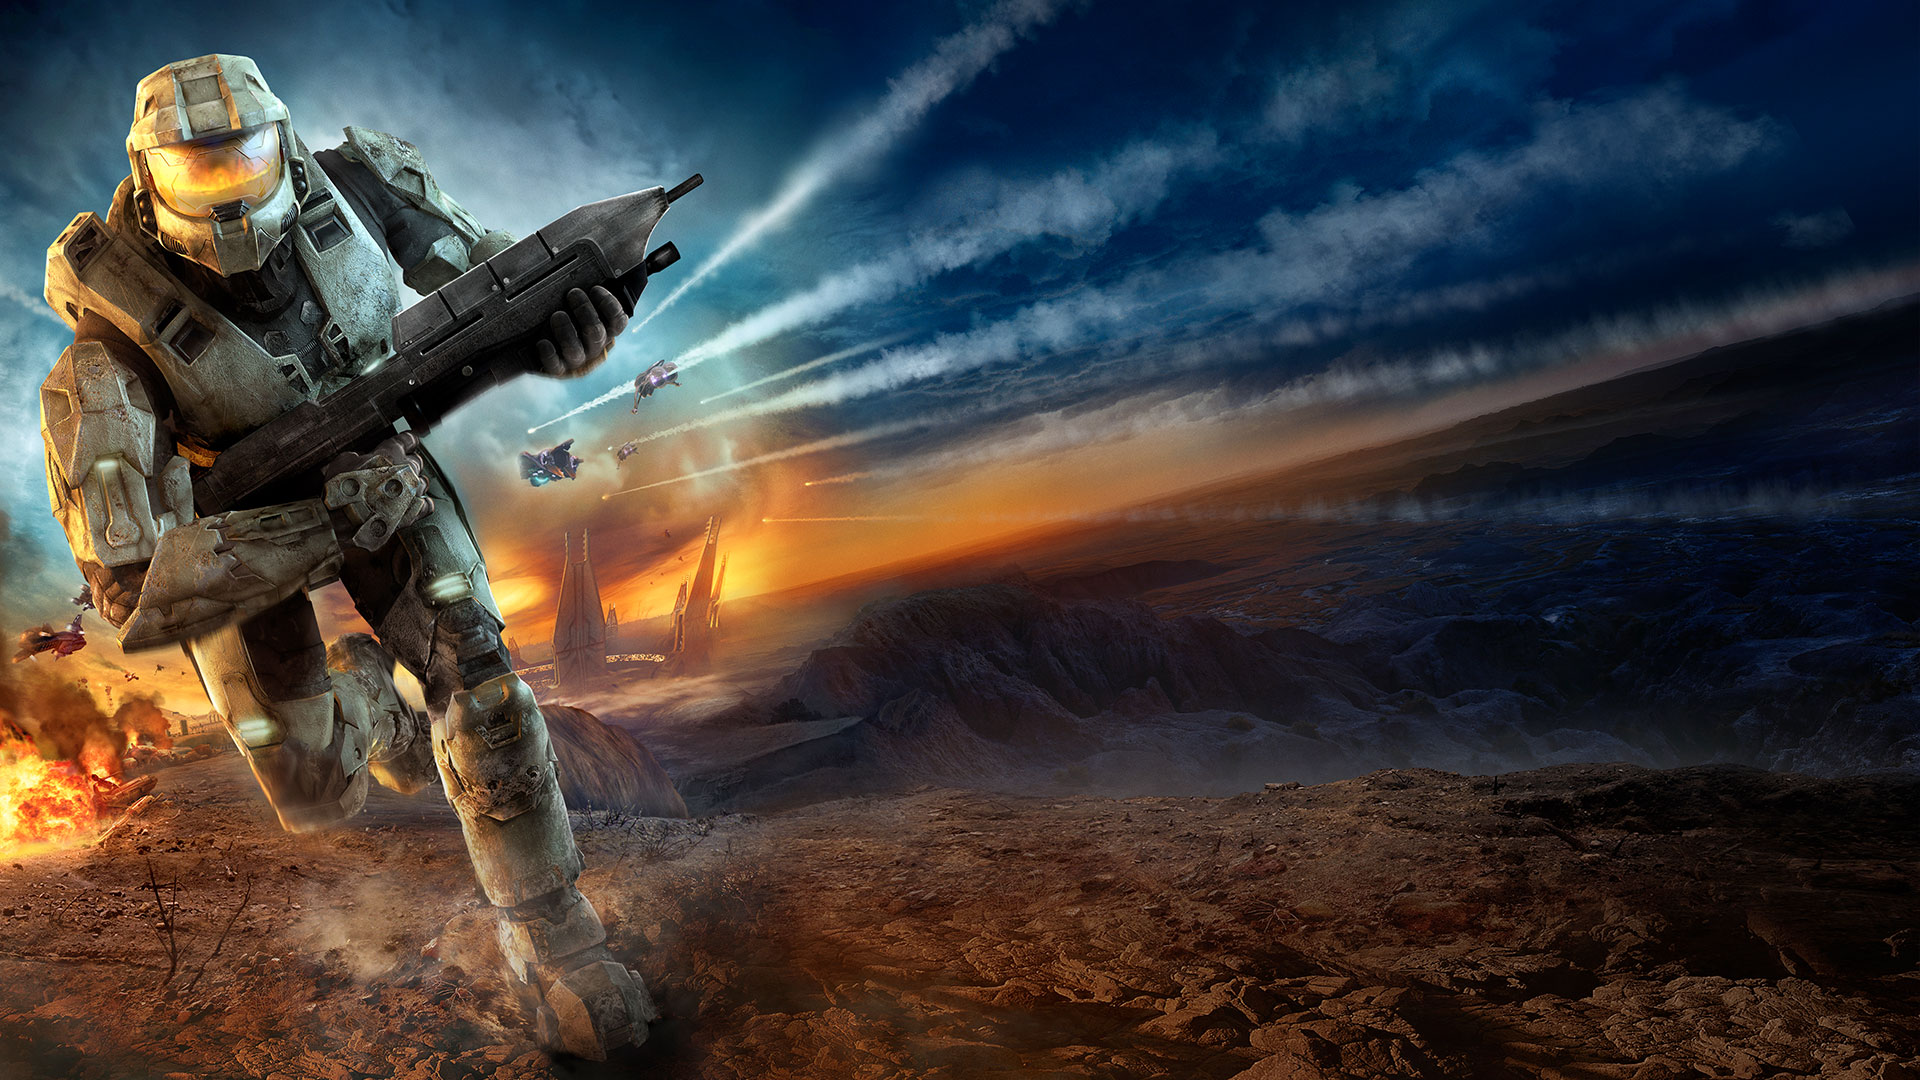 Here's 24 minutes of Halo: Reach PC gameplay in 4K